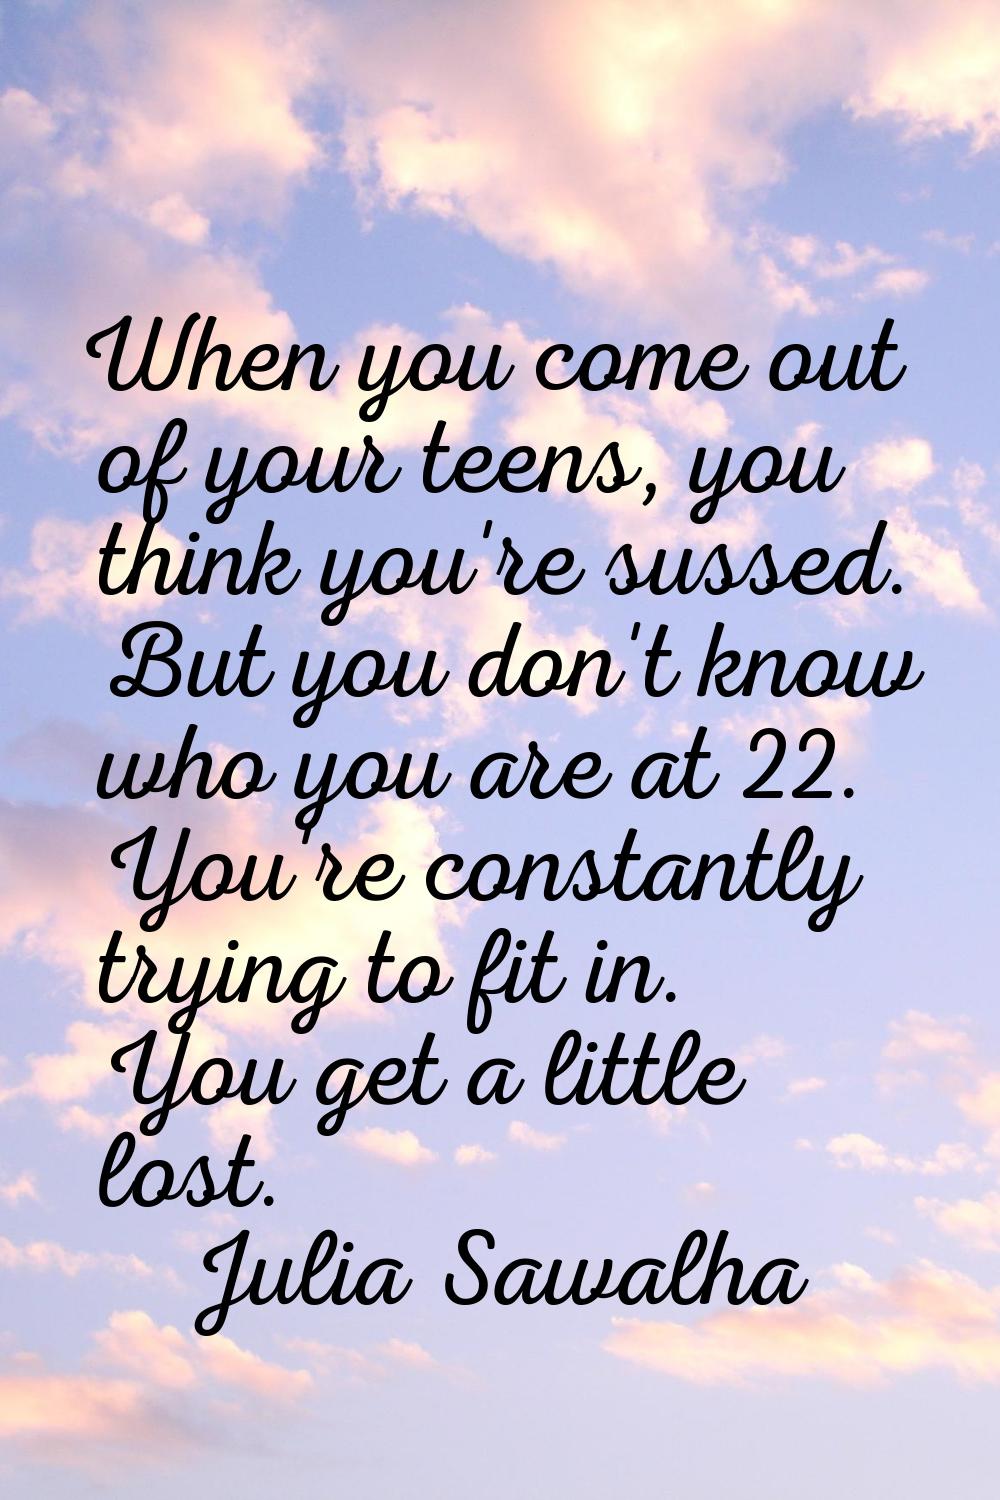 When you come out of your teens, you think you're sussed. But you don't know who you are at 22. You